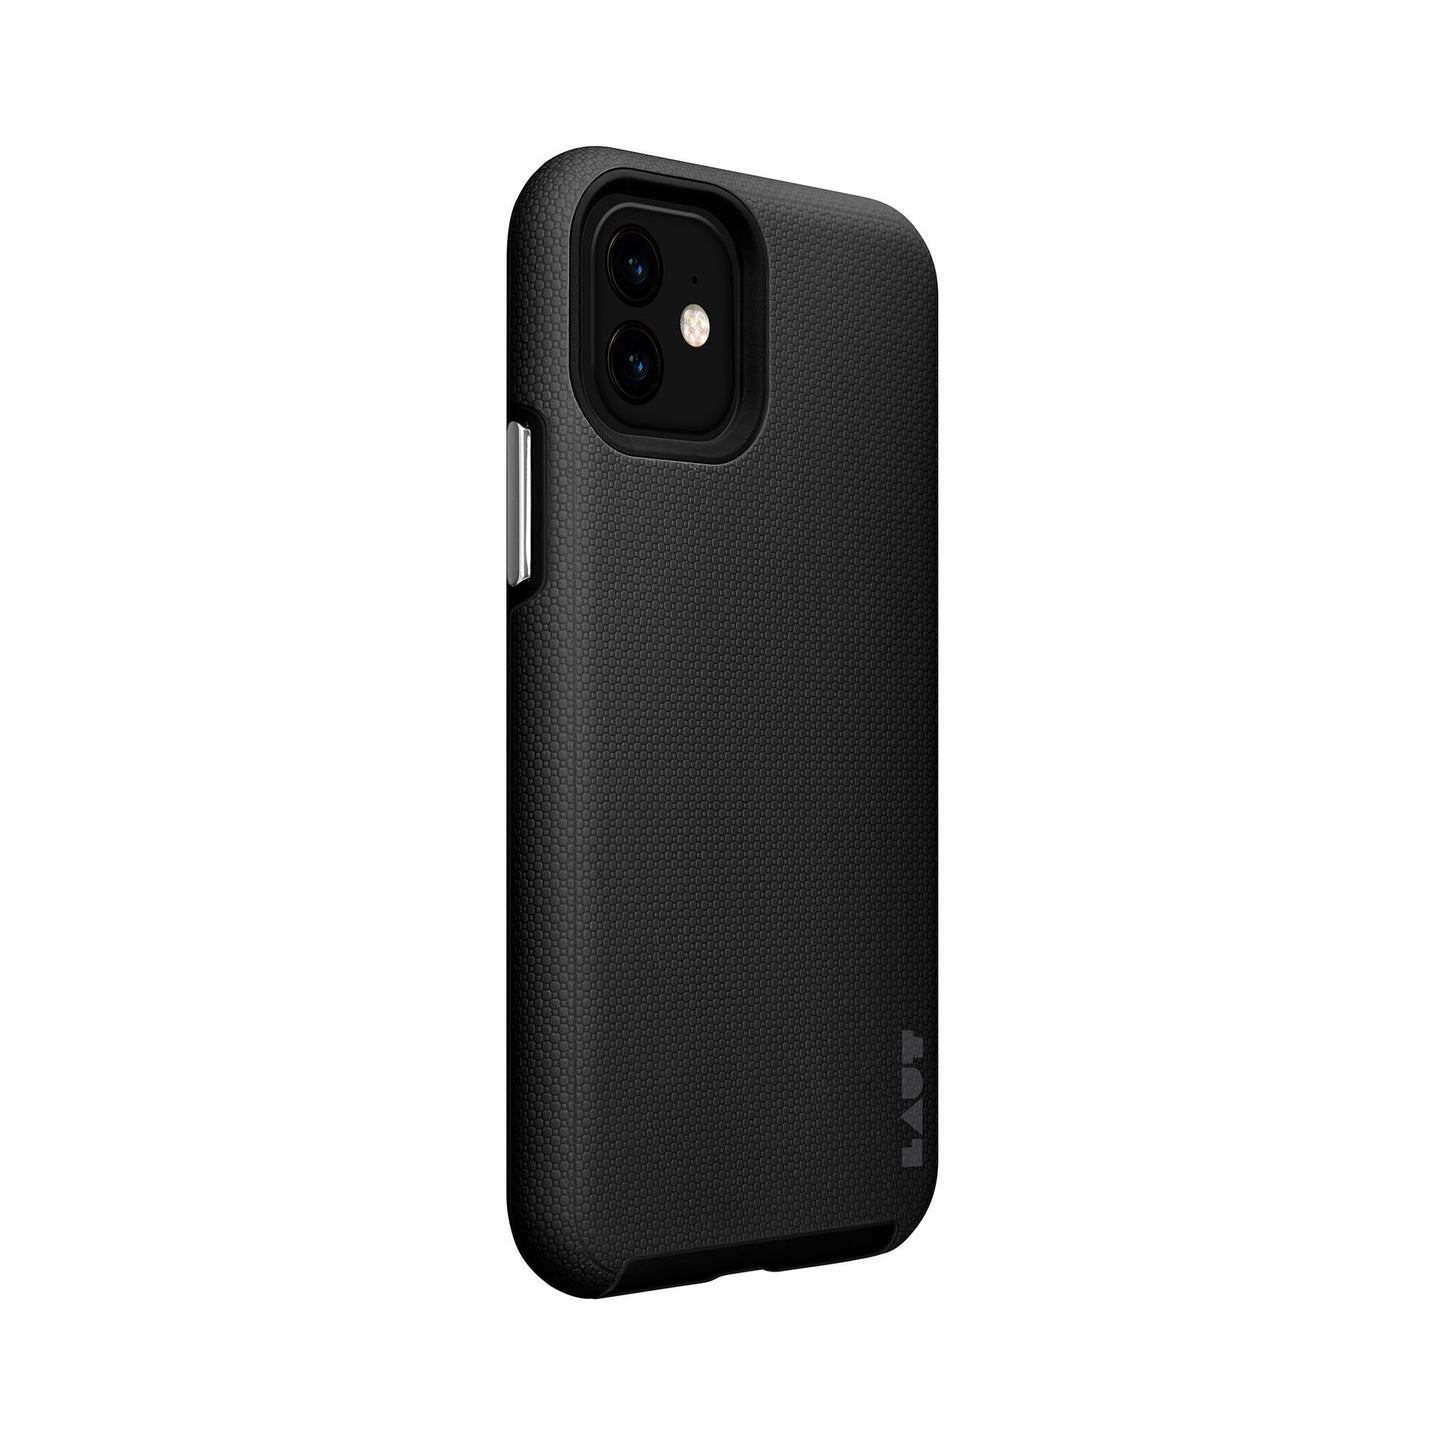 LAUT Shield for iPhone 11 - Black